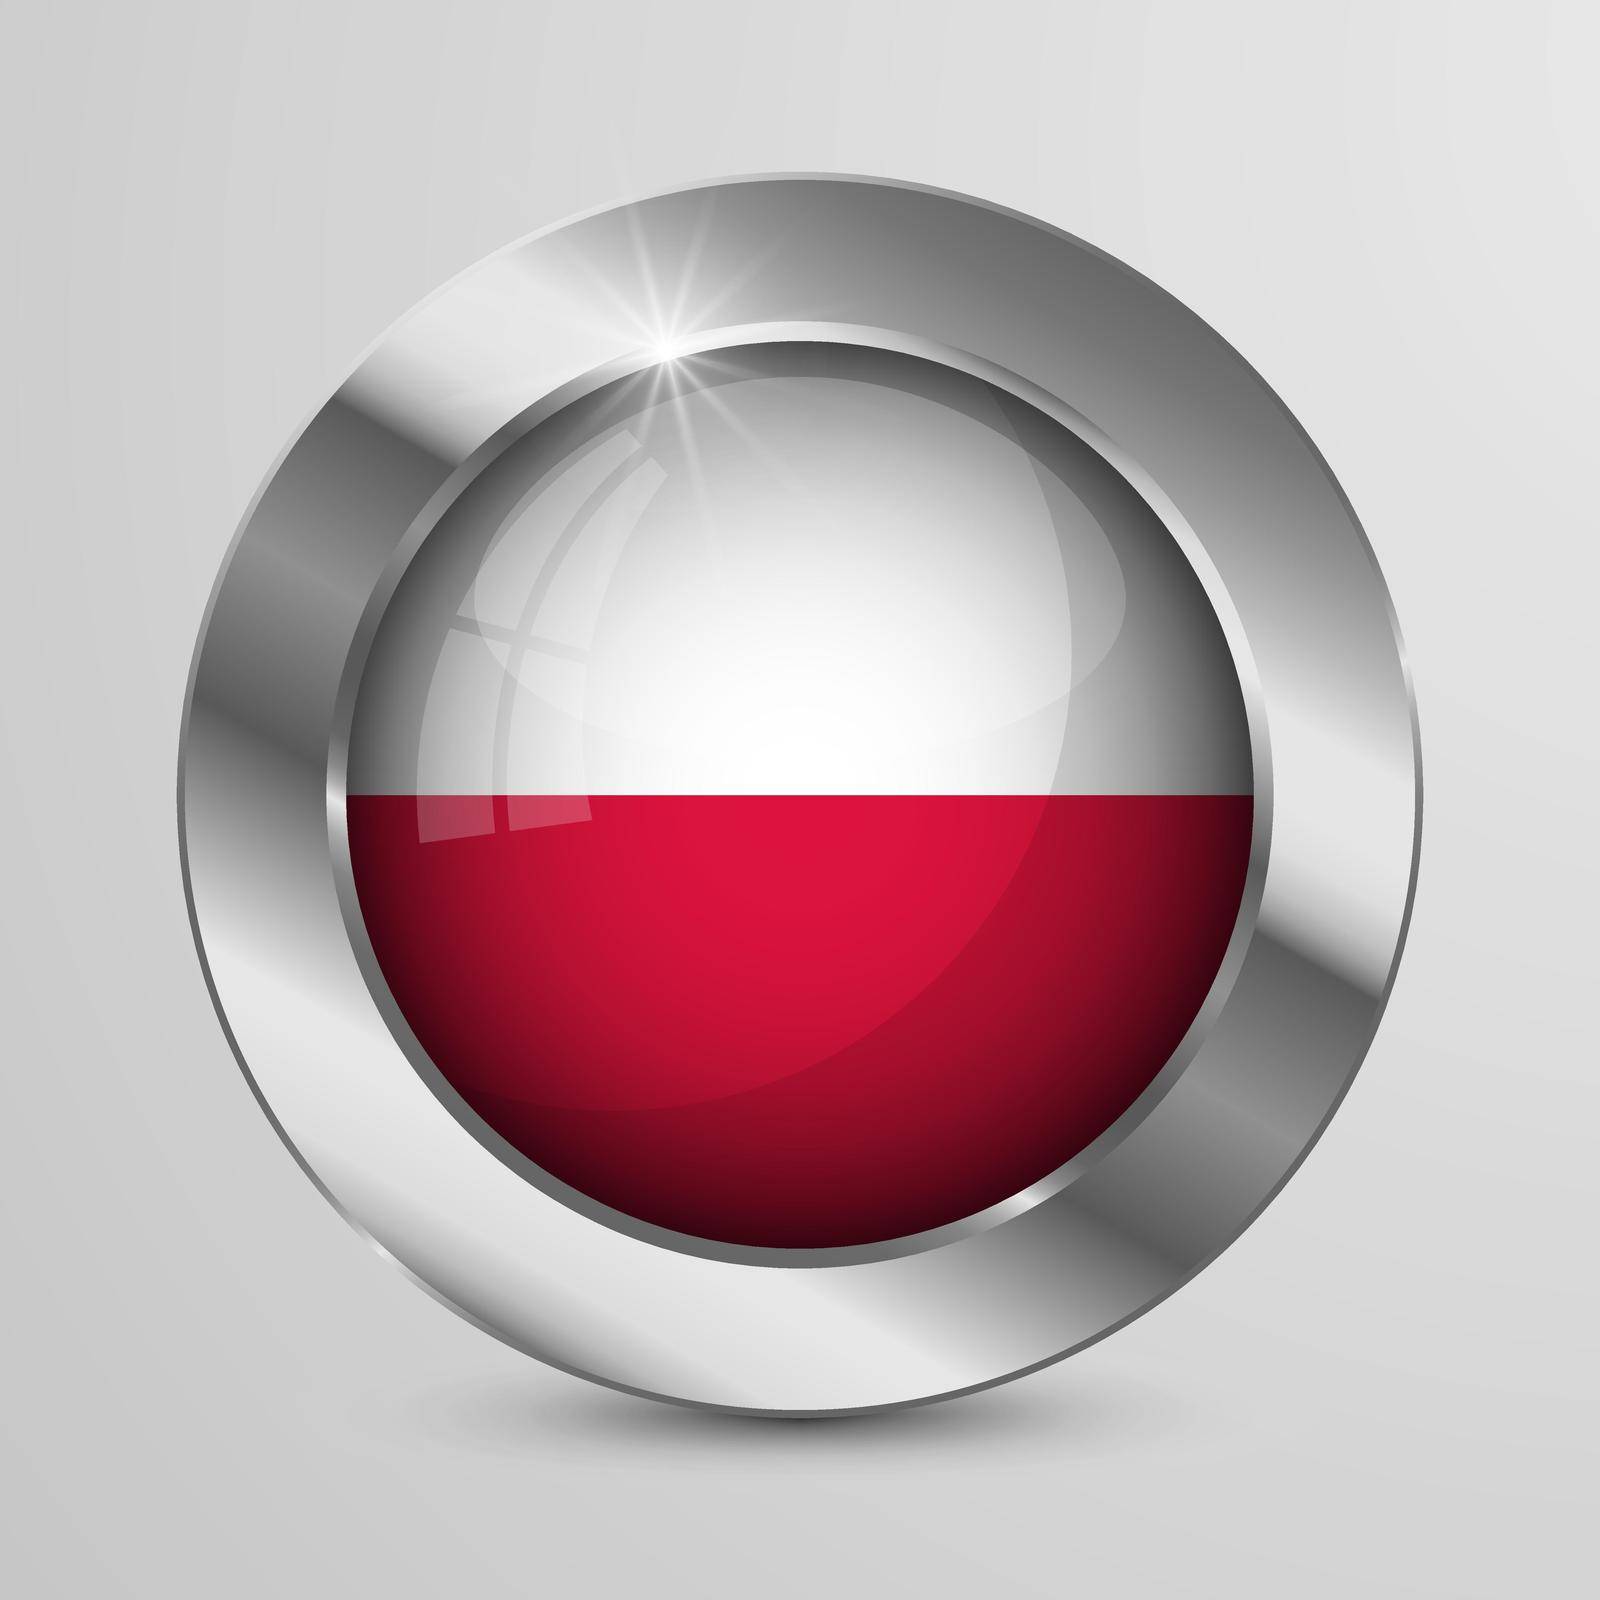 EPS10 Vector Patriotic Button with Poland flag colors. An element of impact for the use you want to make of it.